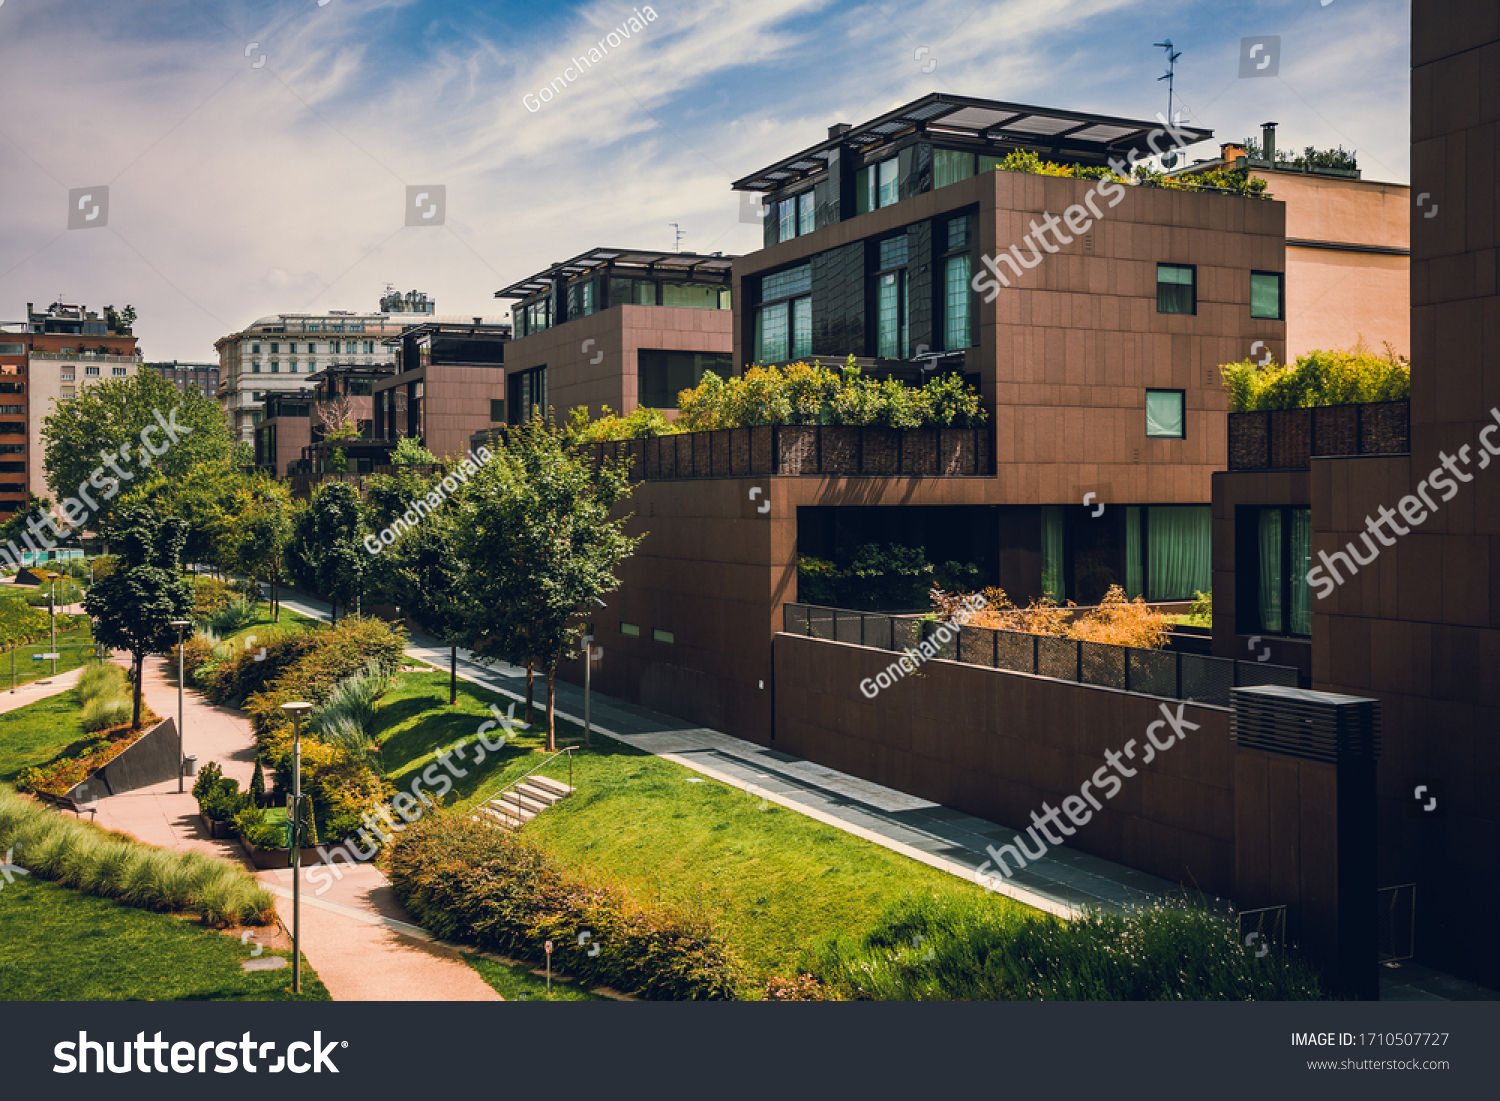 Modern residential buildings in the public green area. Apartment houses in Europe. Beautiful view of real estate homes in Milan, Italy. Business district in summer. Walking area with trees and grass. #1710507727